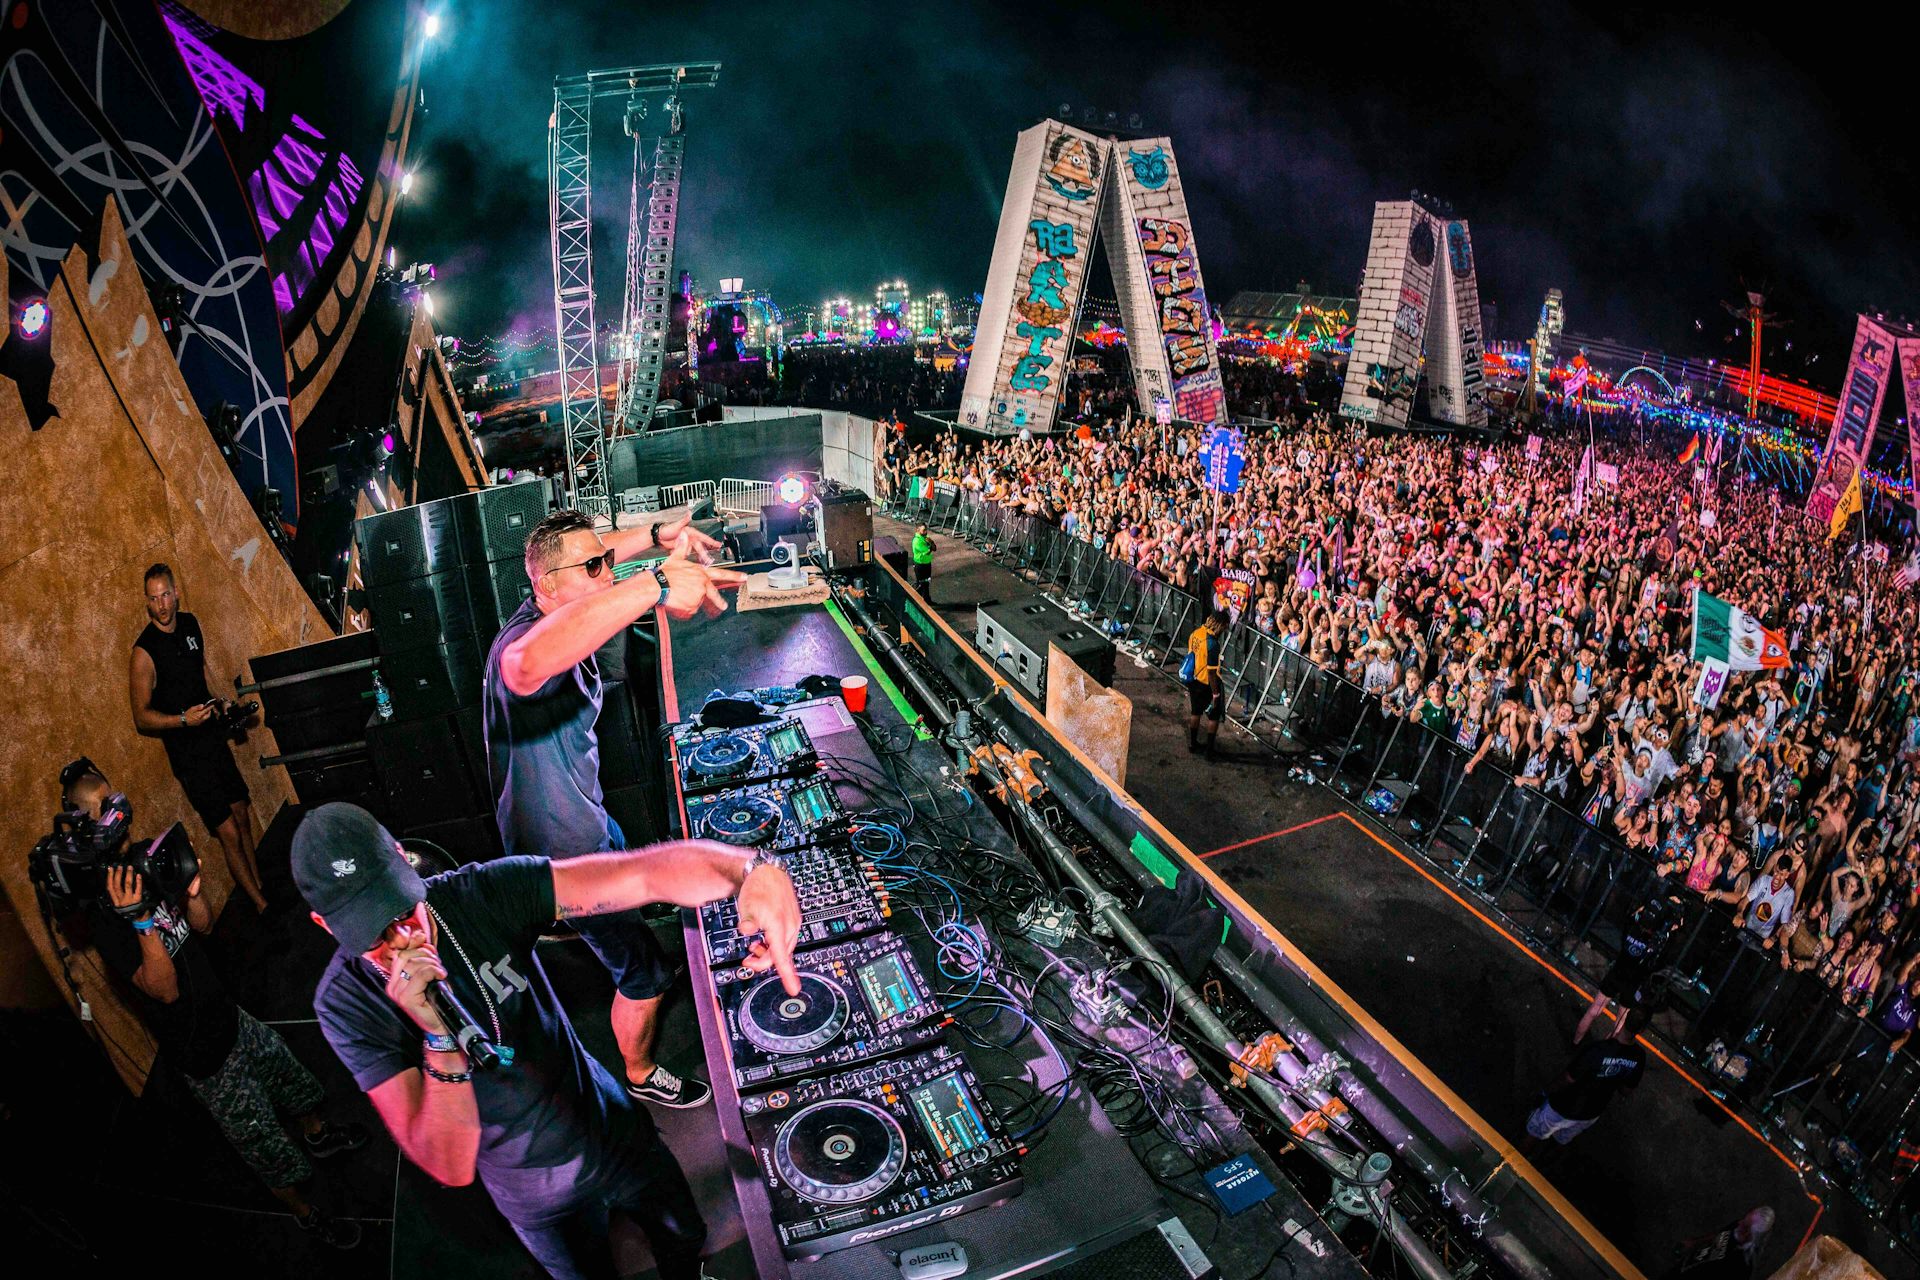 An aerial view of two DJs performing in front of a large crowd at a festival